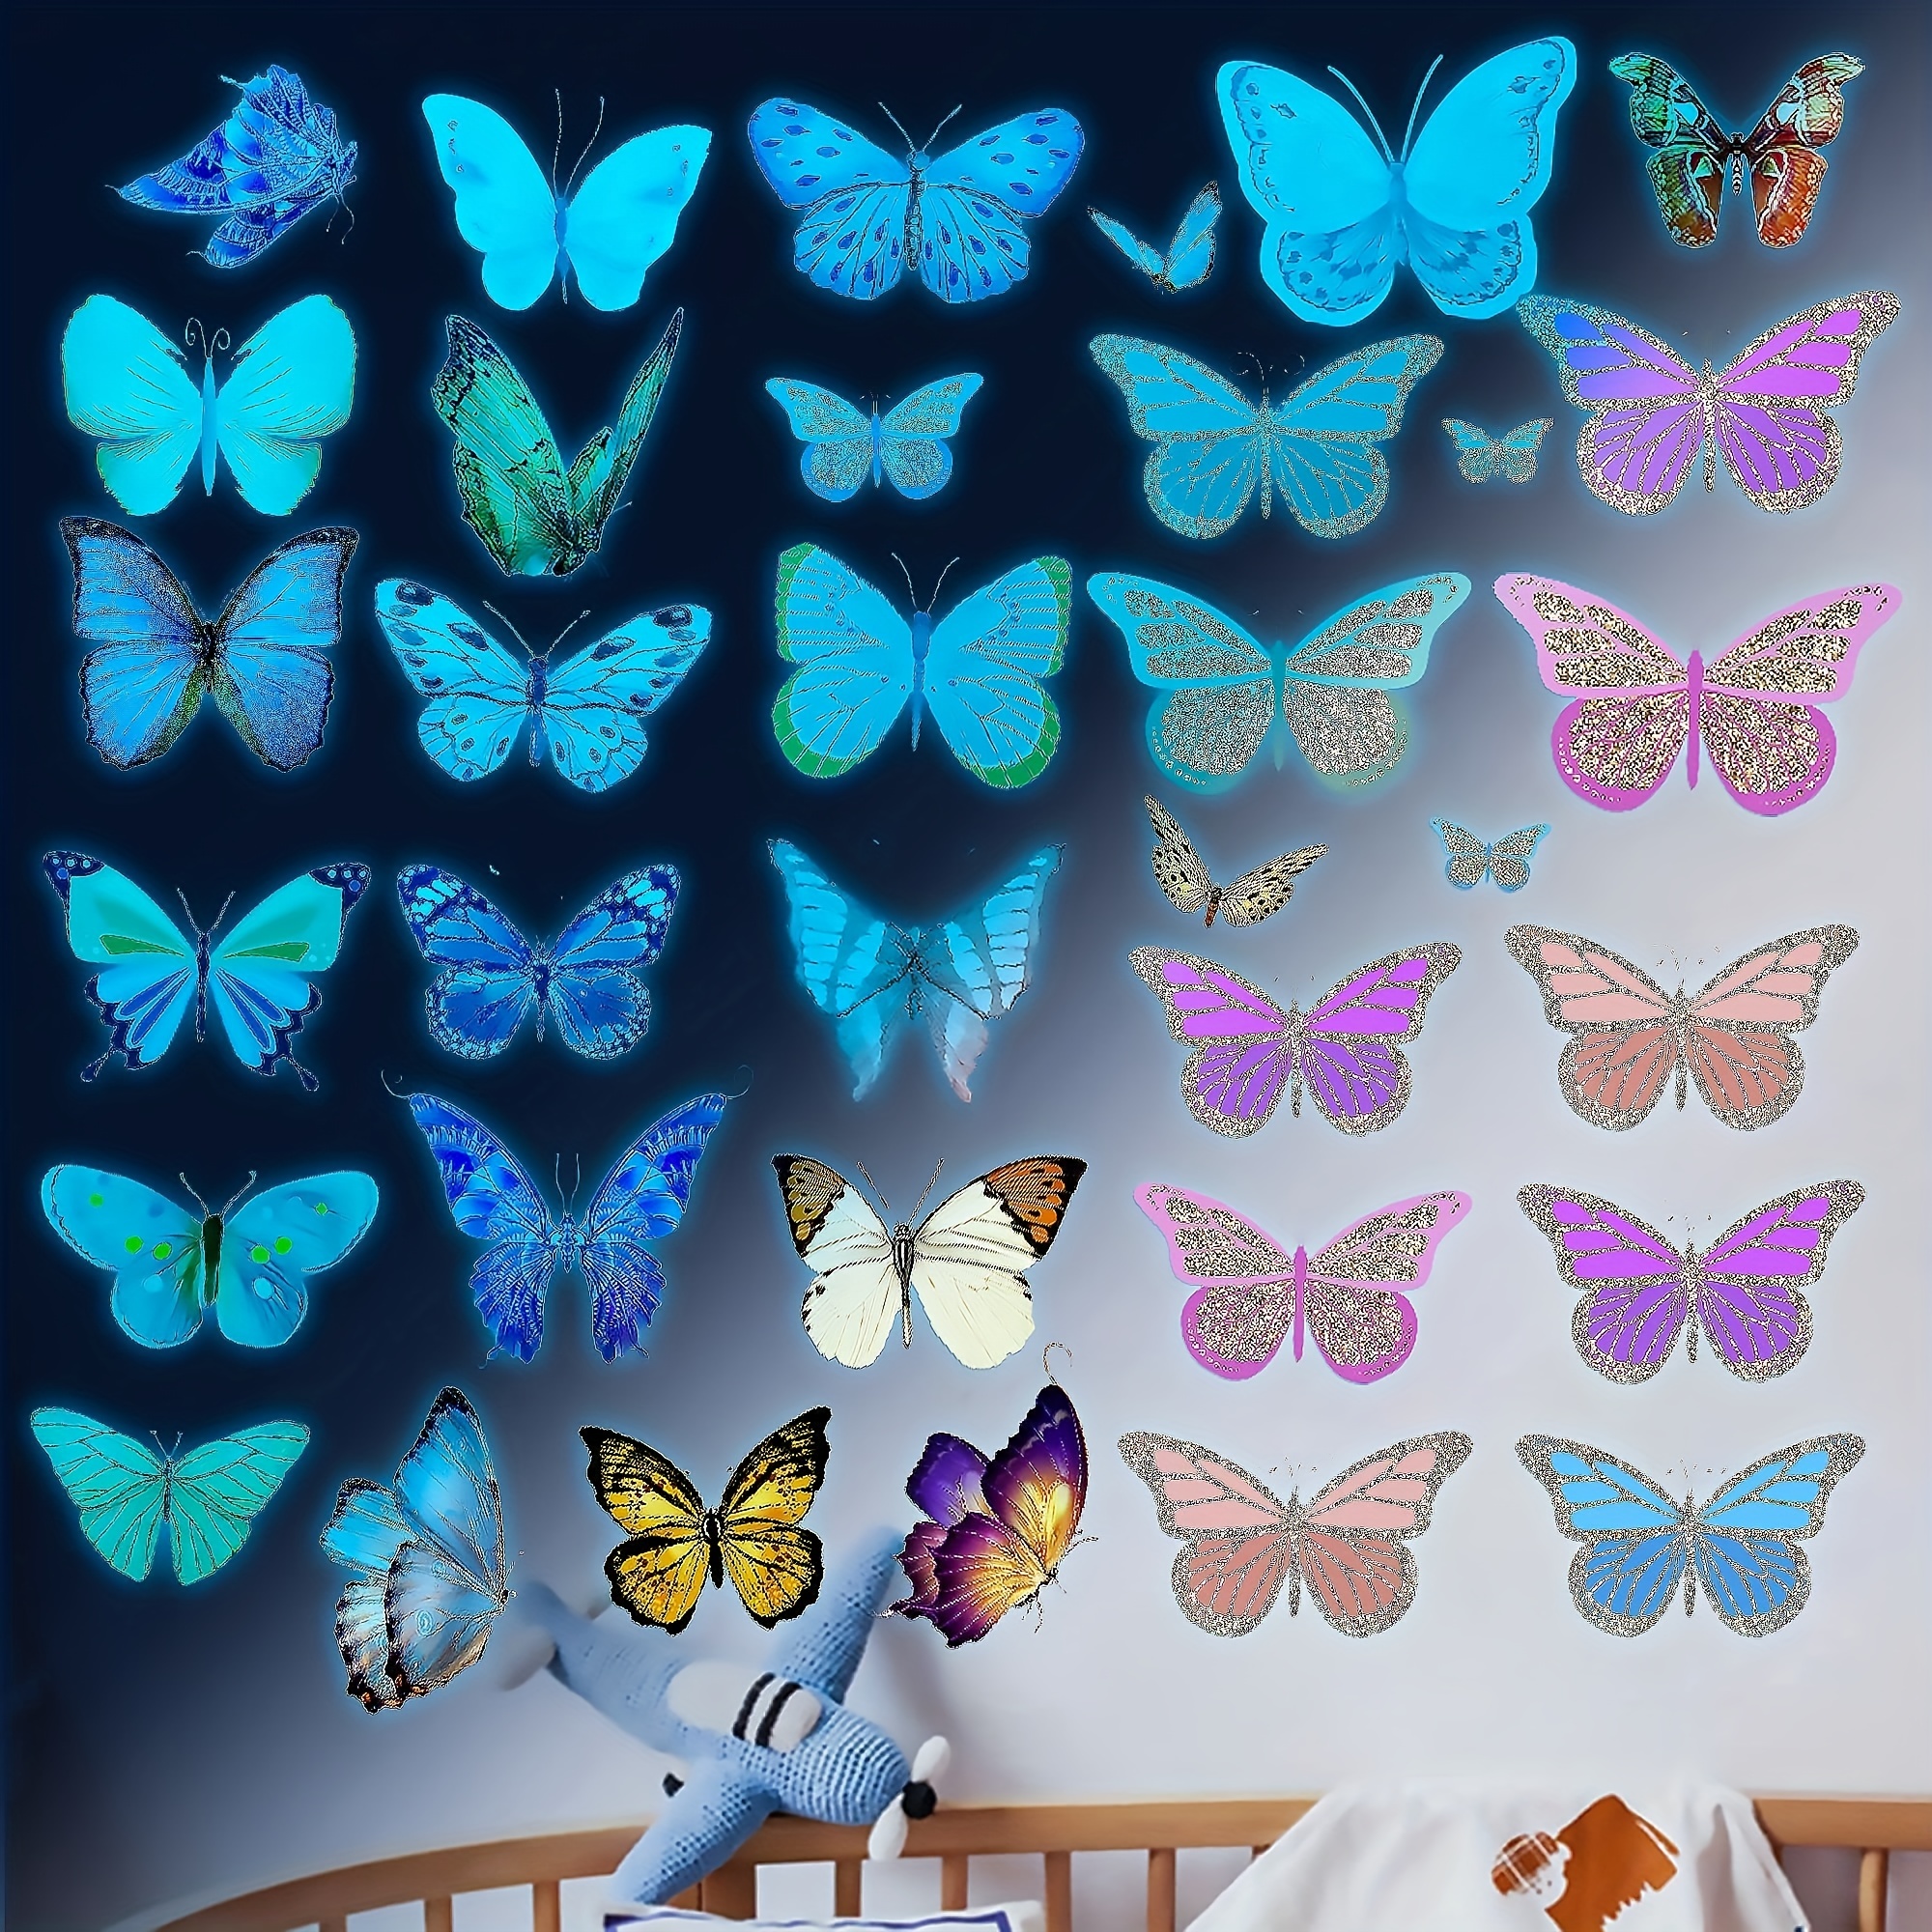 96 Pieces Glow in The Dark Luminous 3D Butterfly Wall Decals Decor  Removable Butterfly Stickers DIY Art Crafts Decor for Kids Bedroom Home  Garden